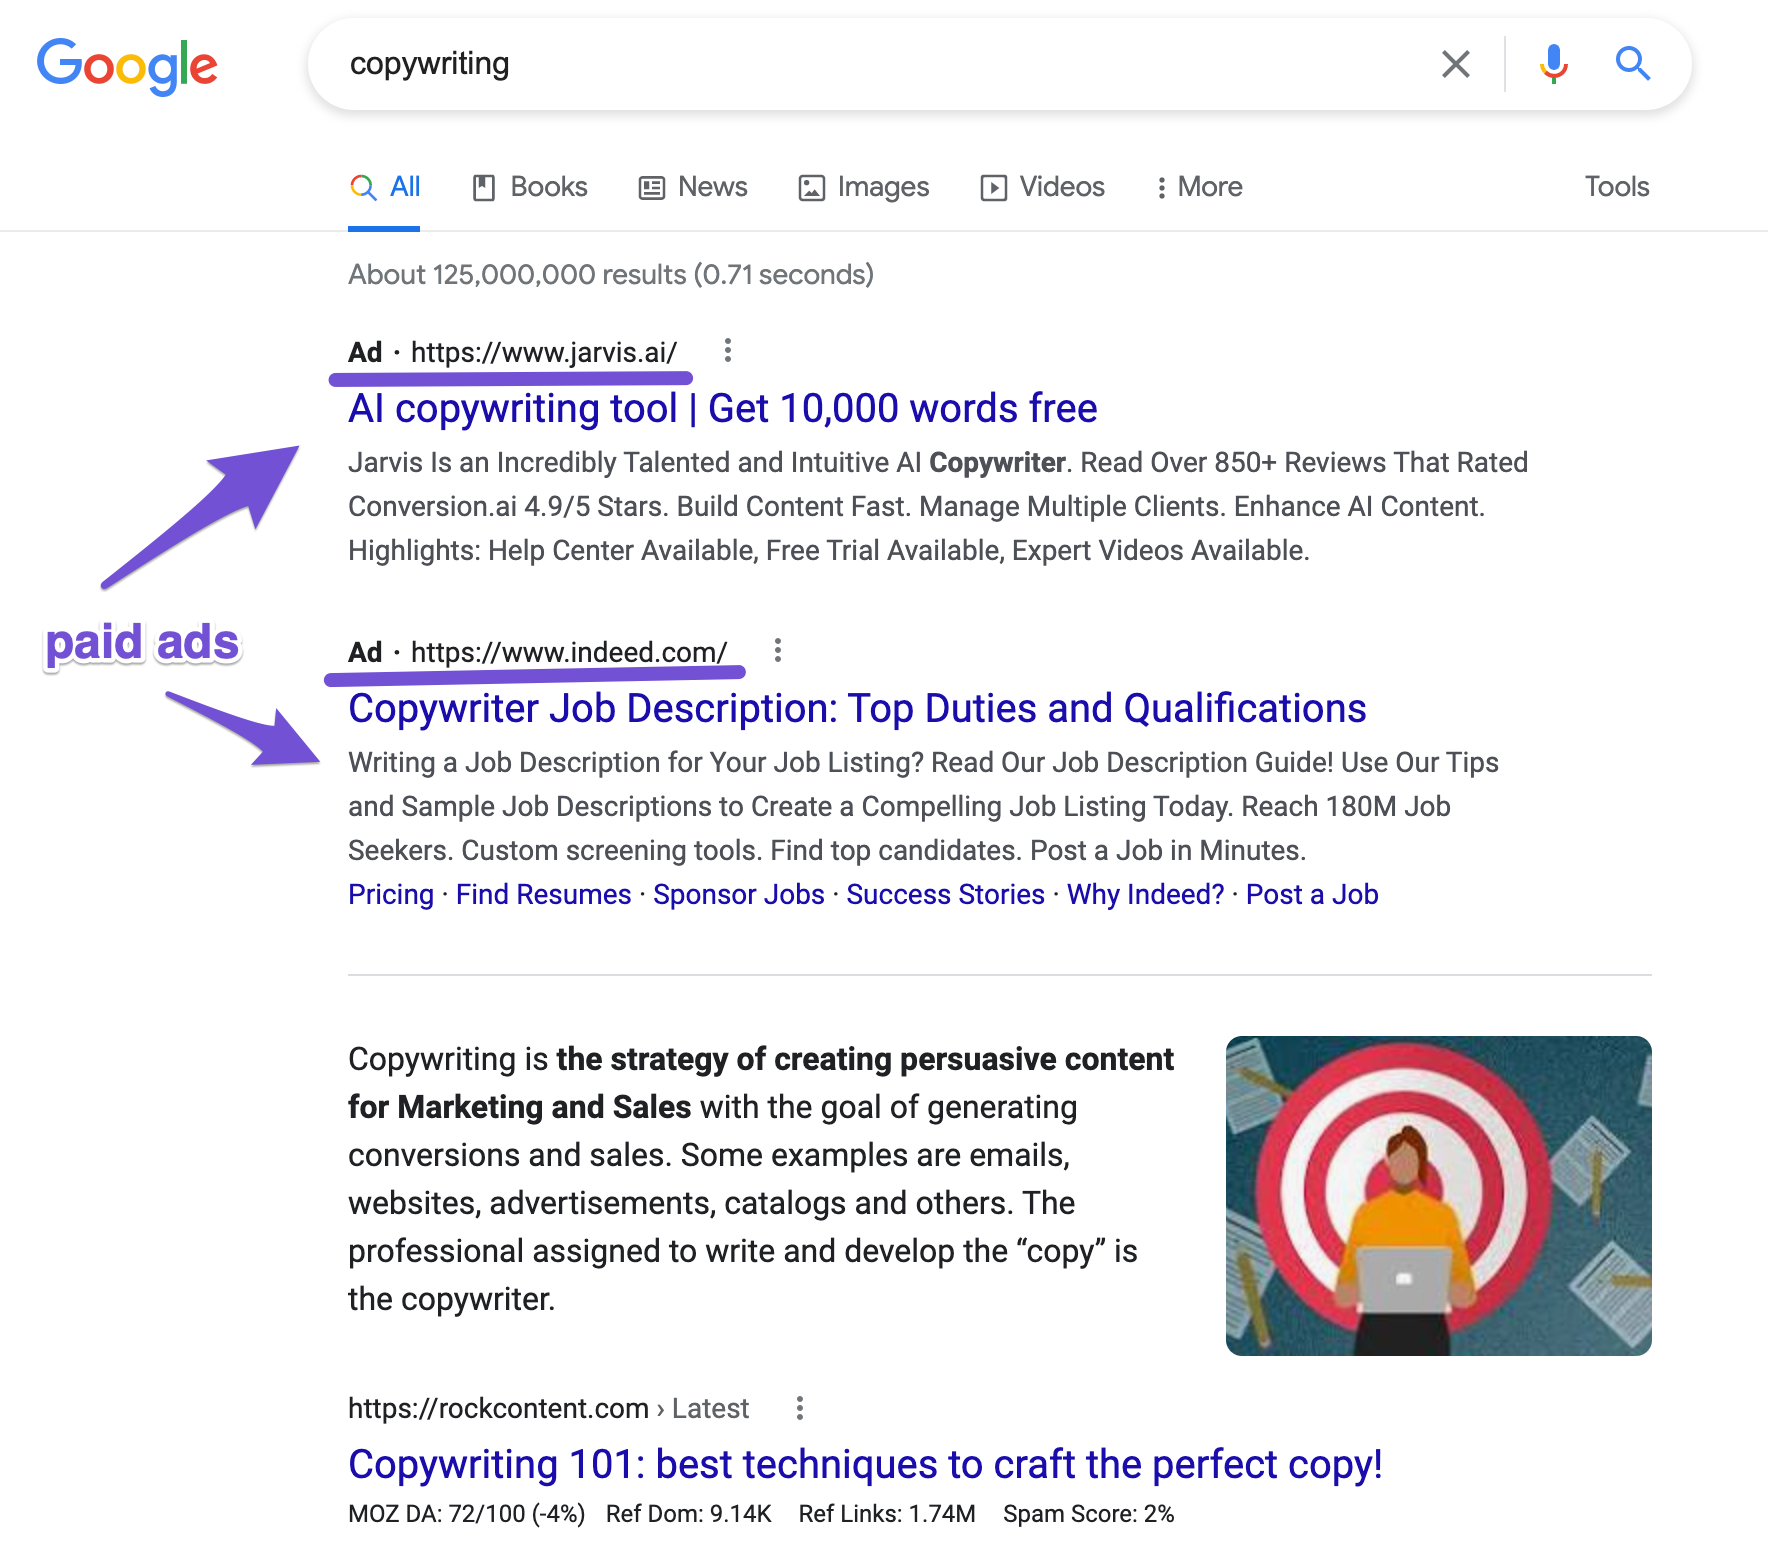 paid ads appearing in serps can get you some affiliate marketing traffic